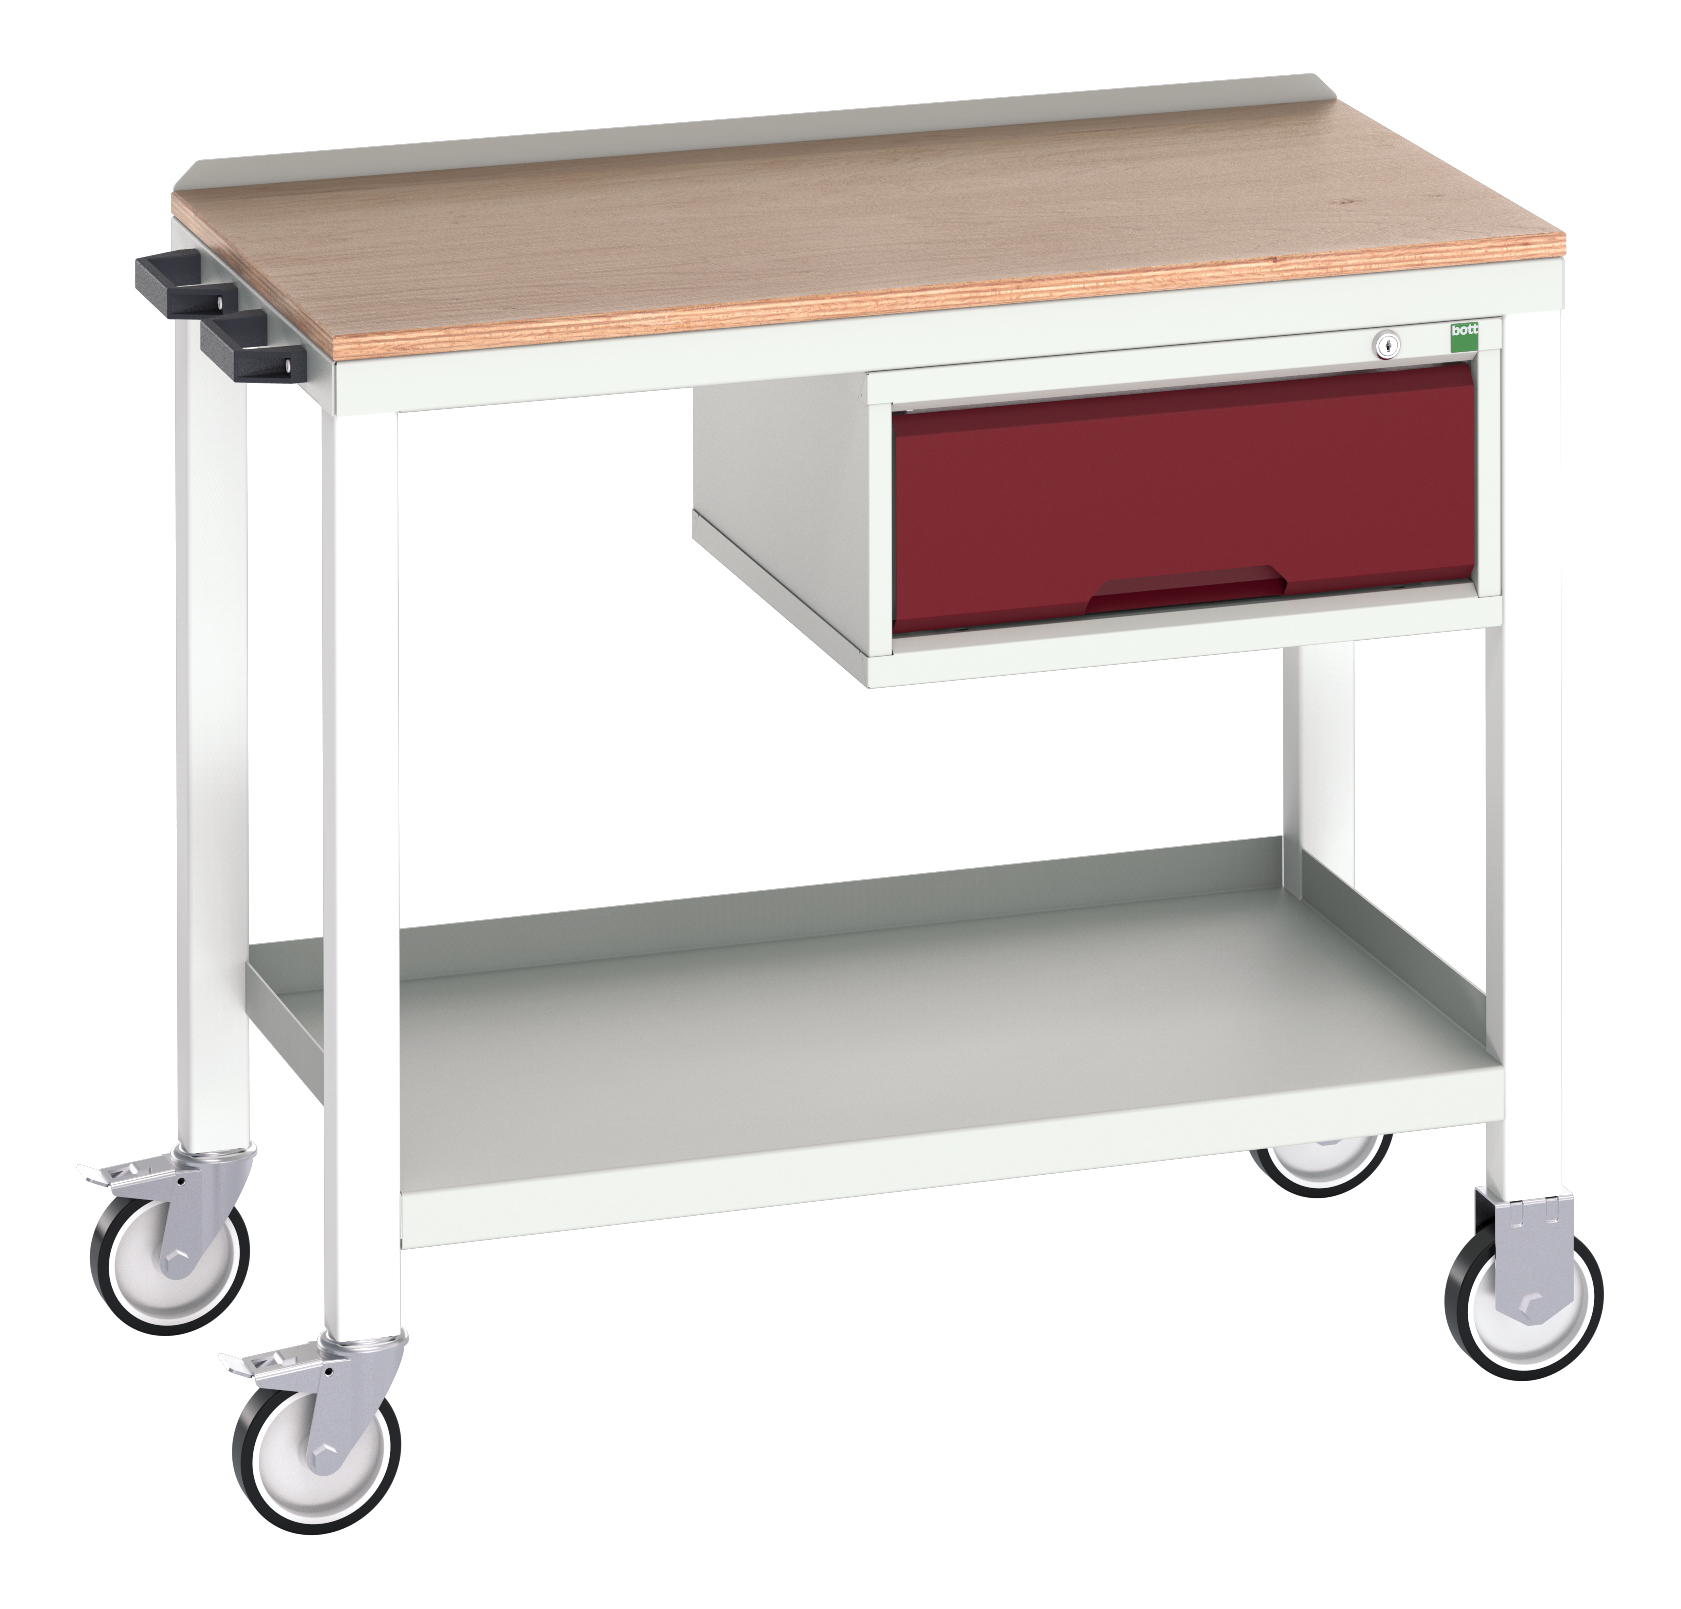 Bott Verso Mobile Welded Bench With 1 Drawer Cabinet - 16922801.24